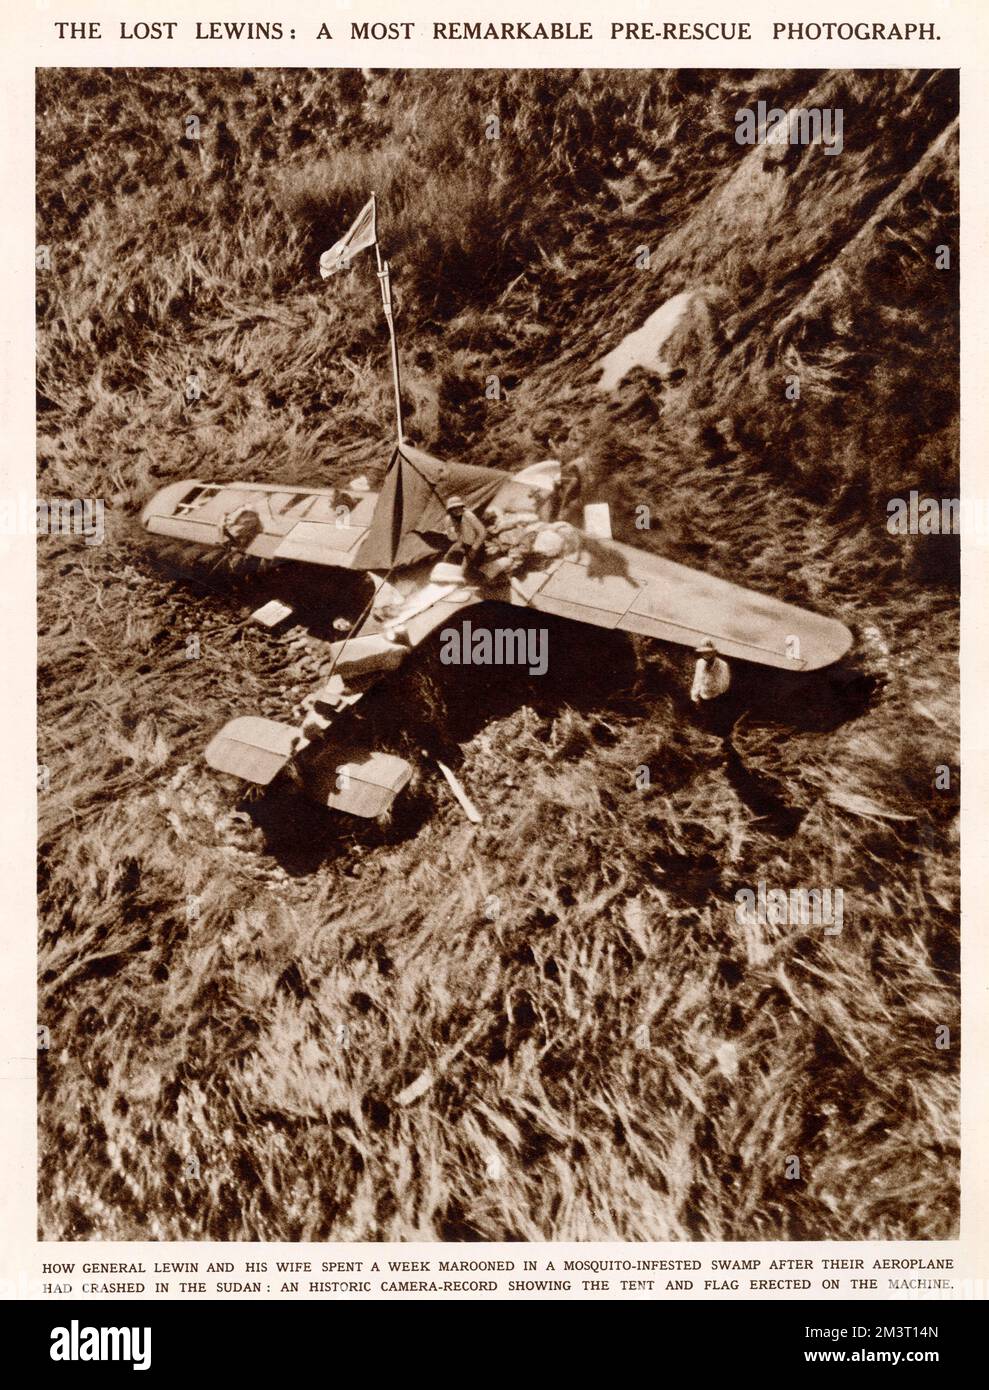 Aerial view of the site where Brigadier-General Arthur Corrie Lewin and his wife crashed-landed their aircraft in the Sudan and were missing for some time before being discovered. Stock Photo